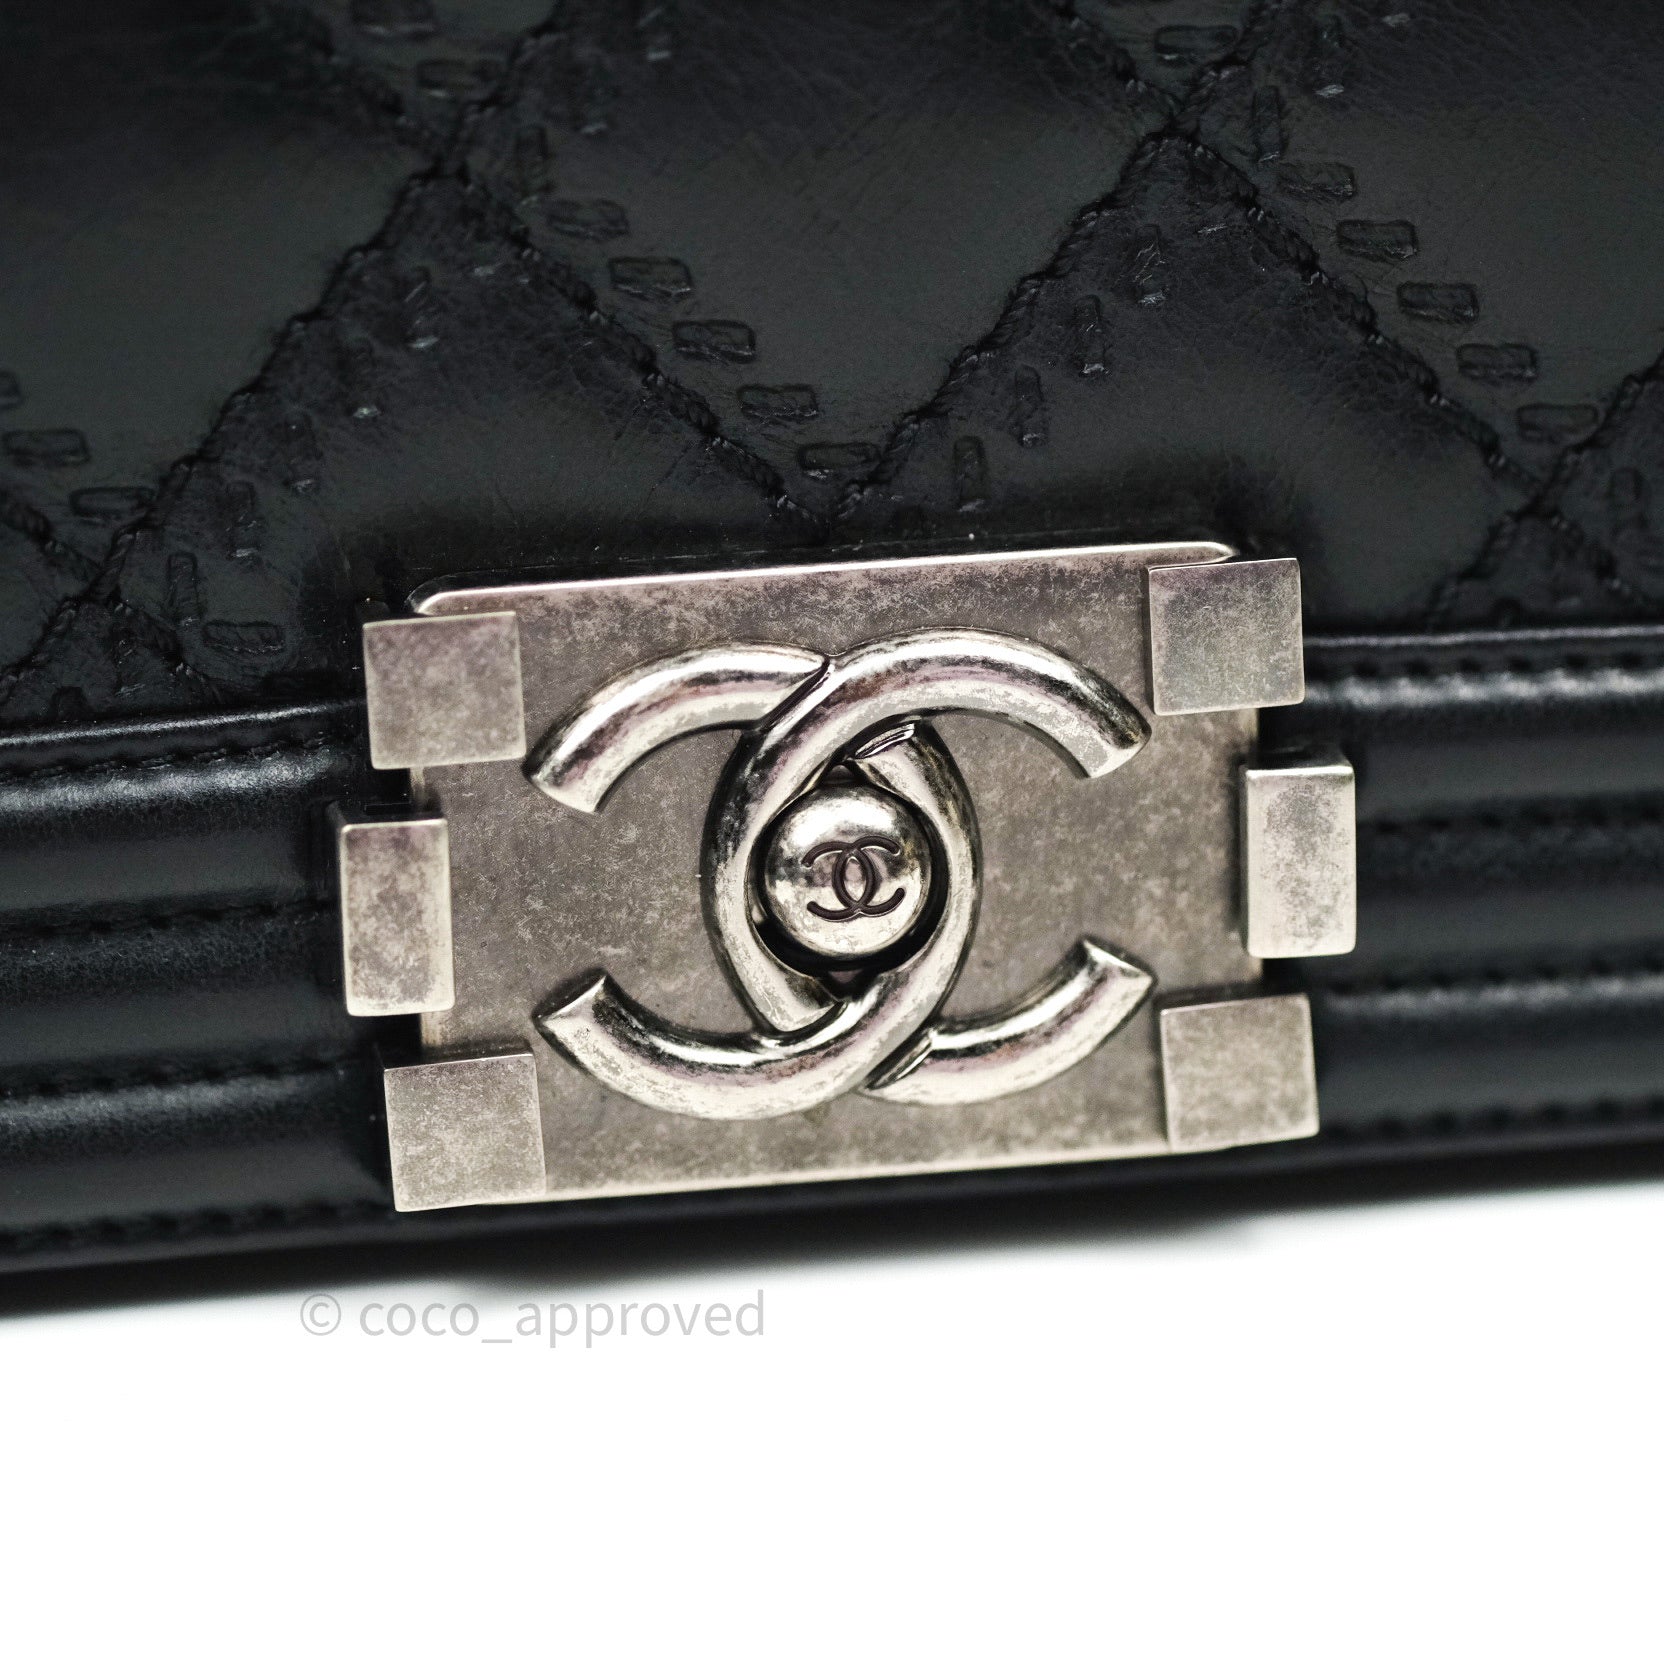 Jadore Couture on Instagram: ✖️SOLD✖️ Chanel Black Calfskin Gabrielle  Clutch On Chain $2,650.00 Serial No: 25xxxxxx Material: Calfskin Hardware:  Gold & silver-tone Colour: Black Size: 7”L x 2”W x 4.3”H Includes: Dustba